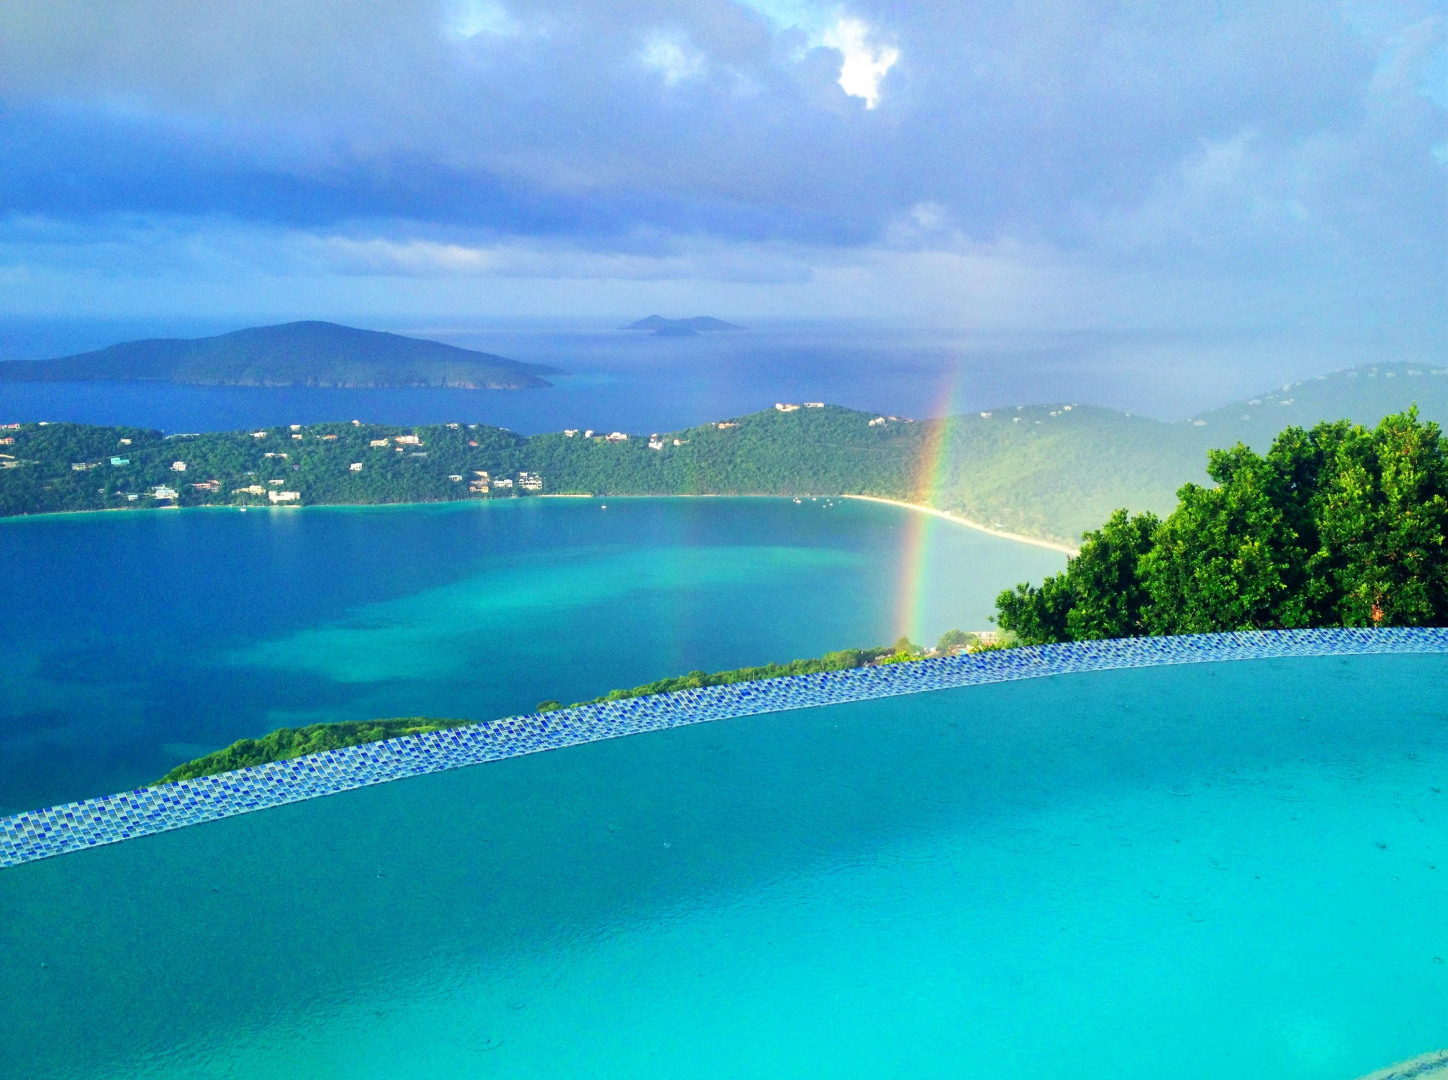 View of Rainbow over Caribbean Sea from Rental Property in ST THomas